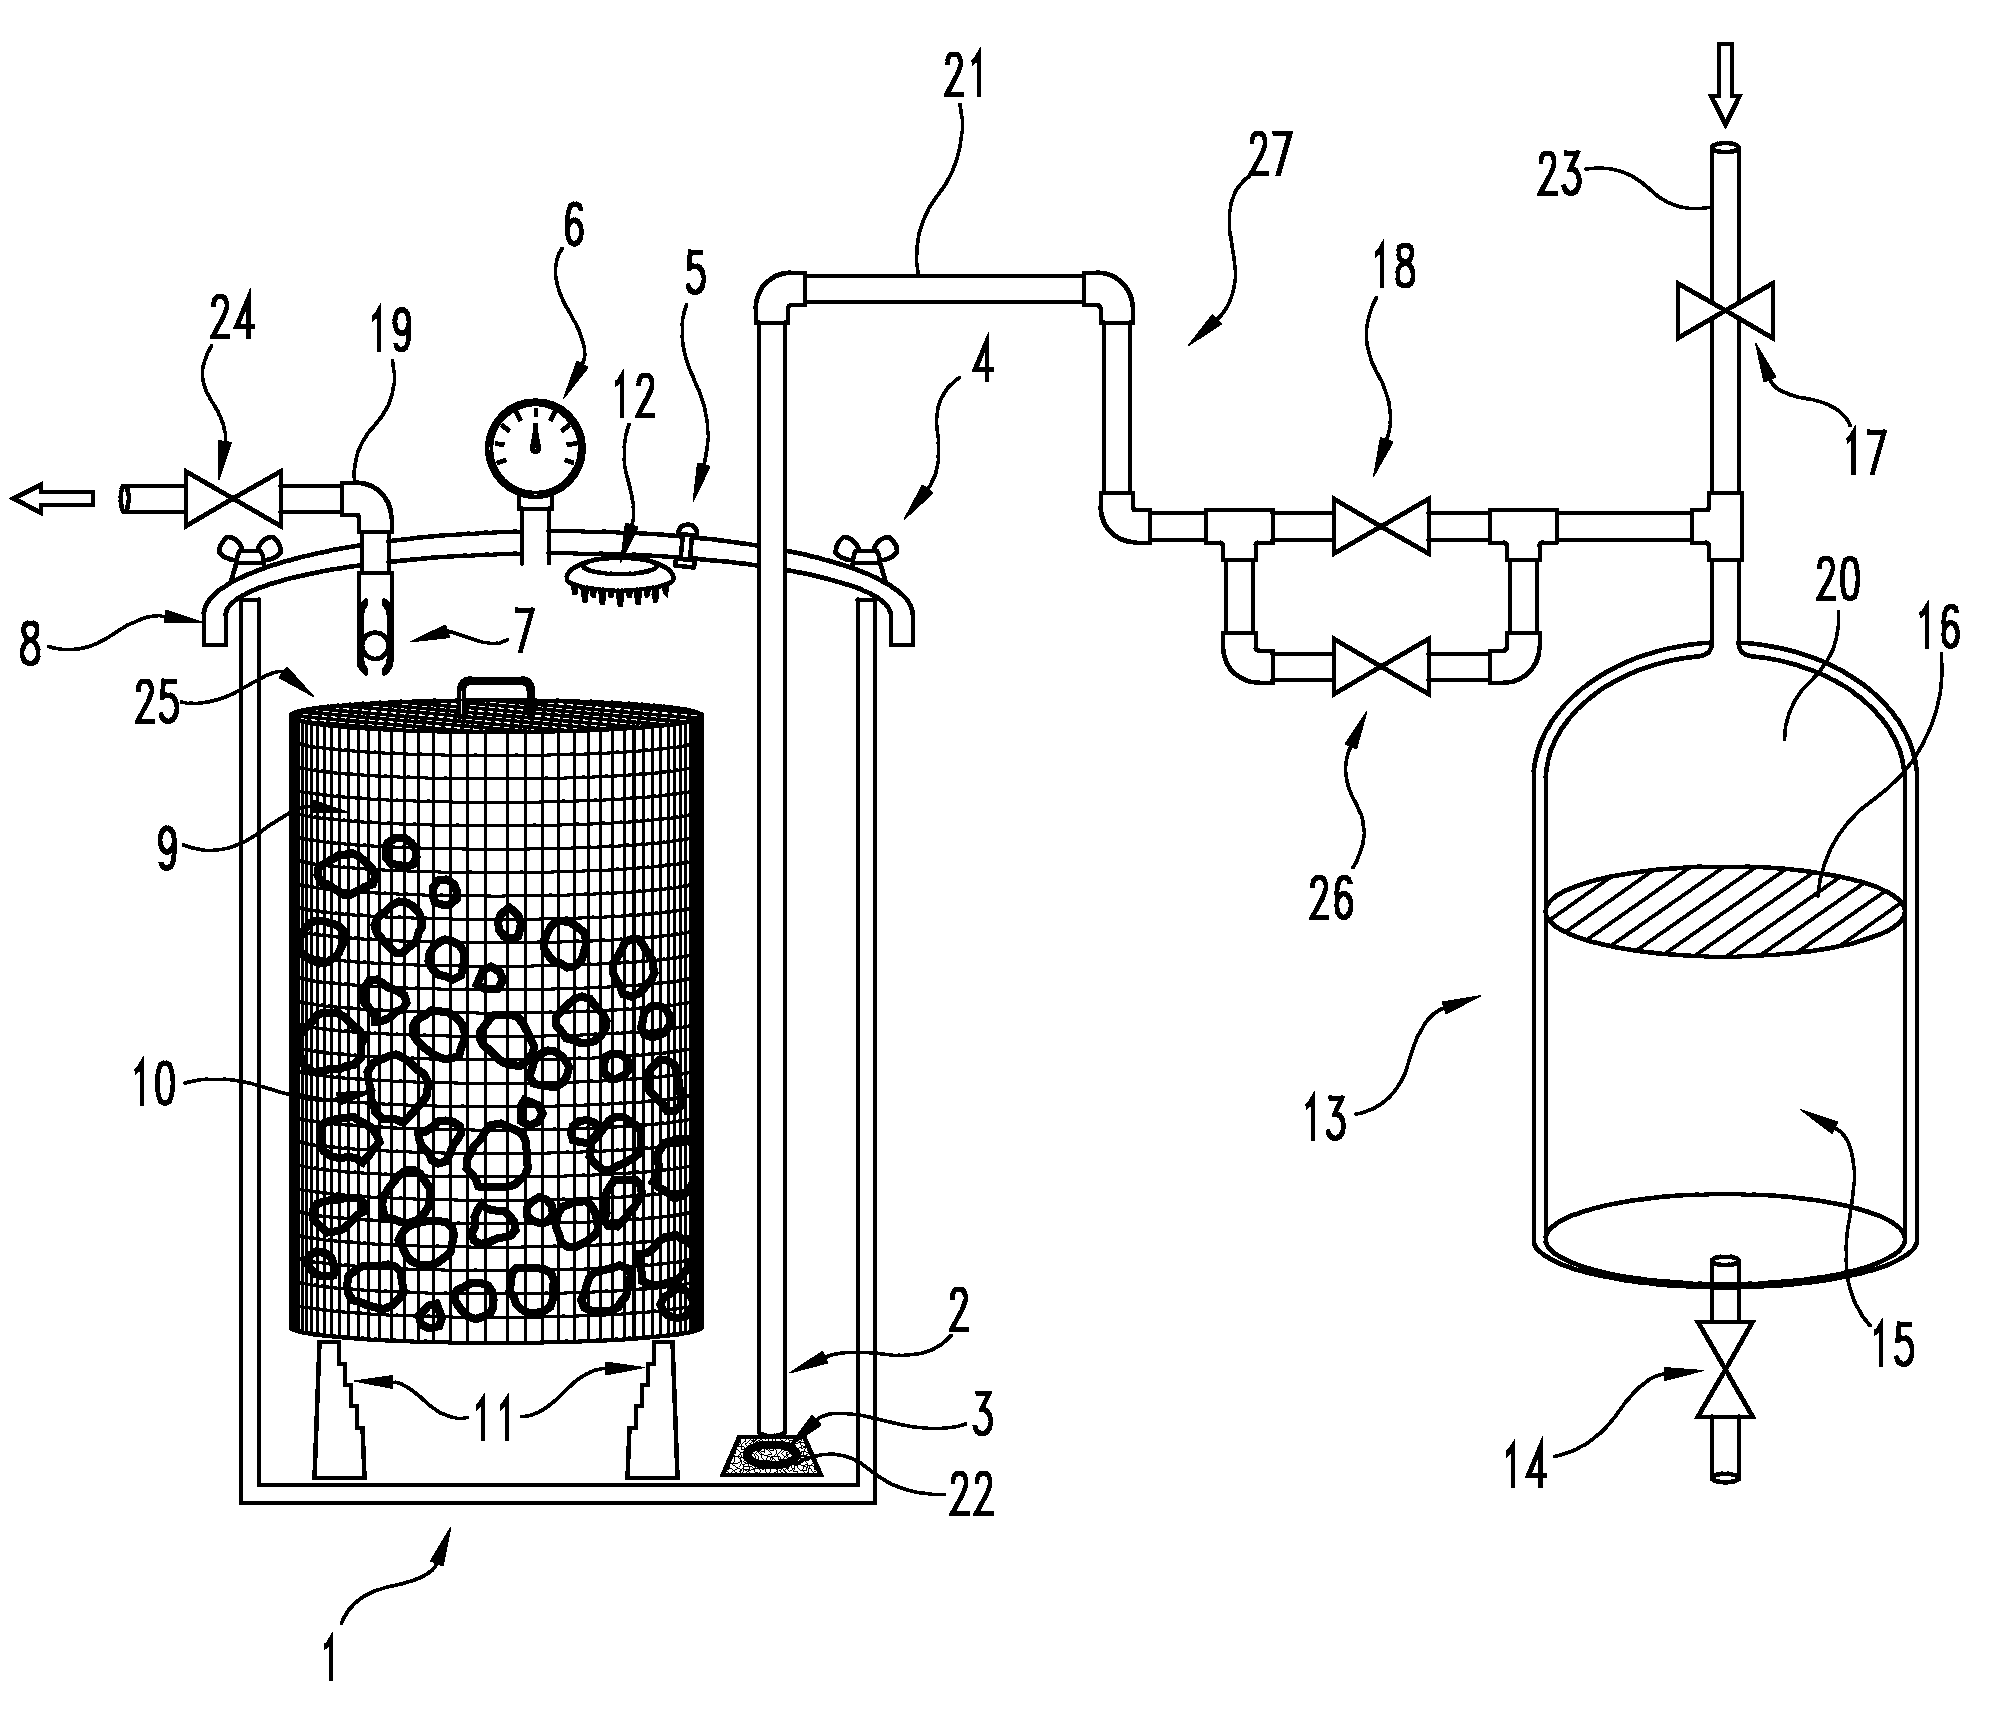 Control system for an on-demand gas generator